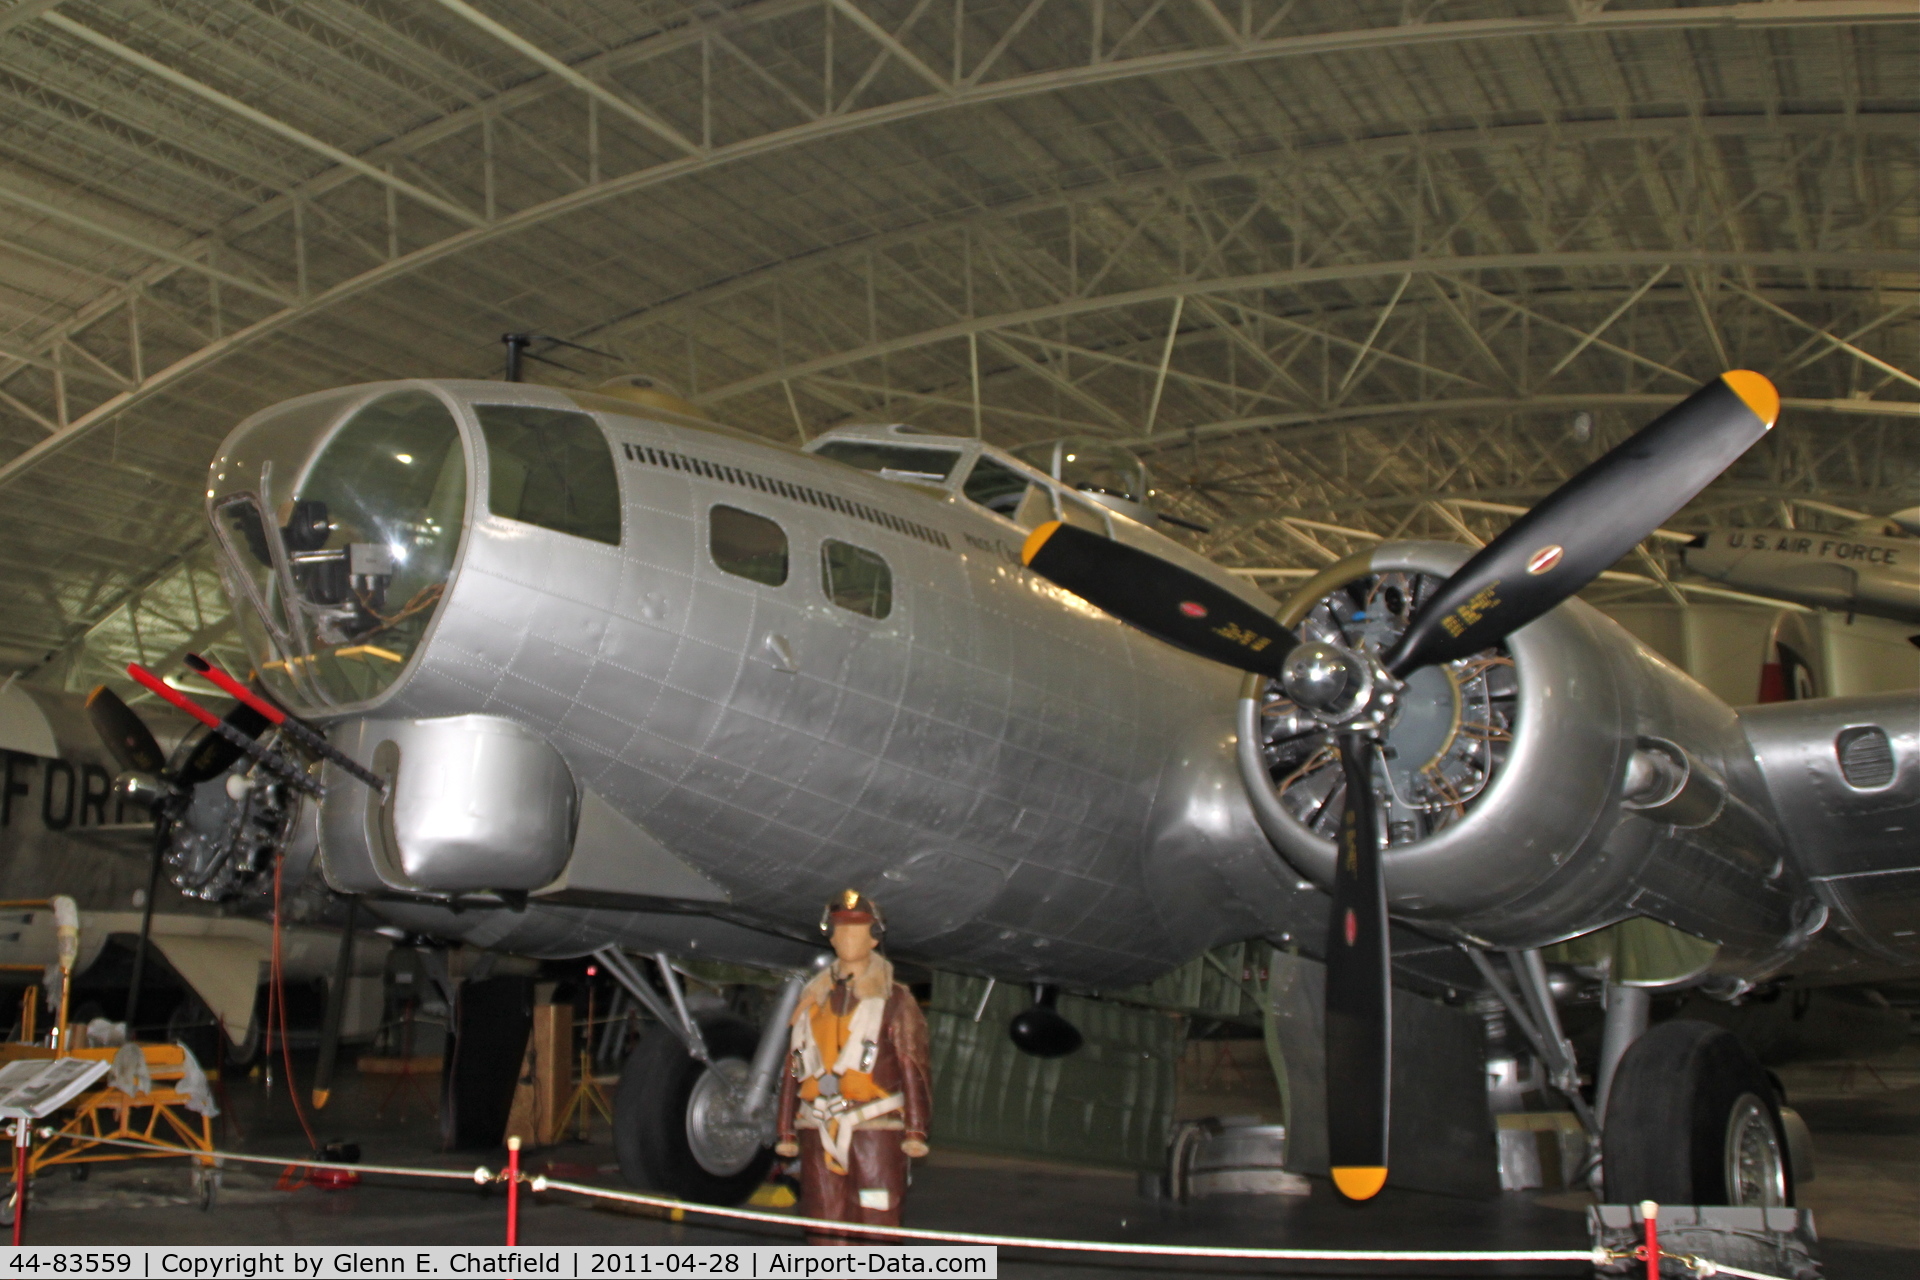 44-83559, 1944 Boeing B-17P-85-DL Flying Fortress C/N 32200, At the Strategic Air & Space Museum, Ashland, NE